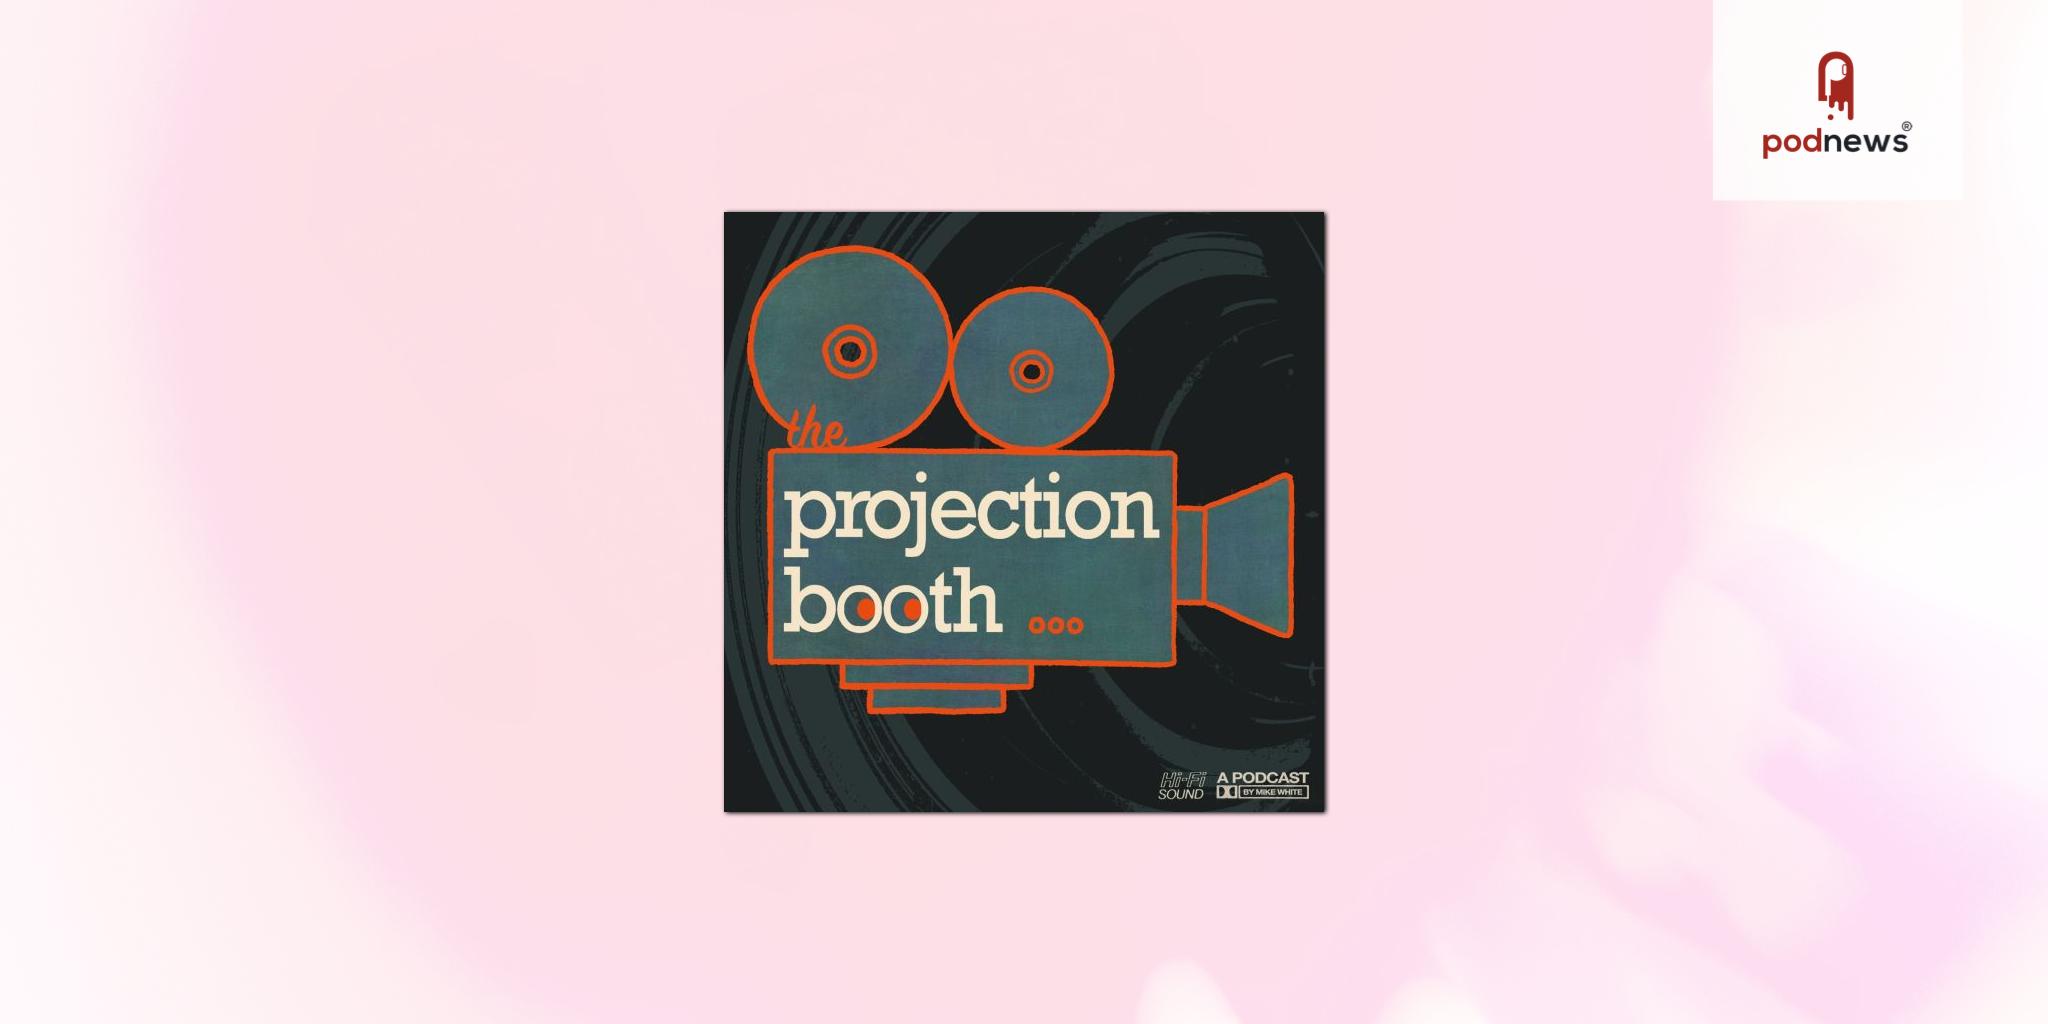 The Projection Booth podcast celebrates 12 years with continued quality and amazing guests